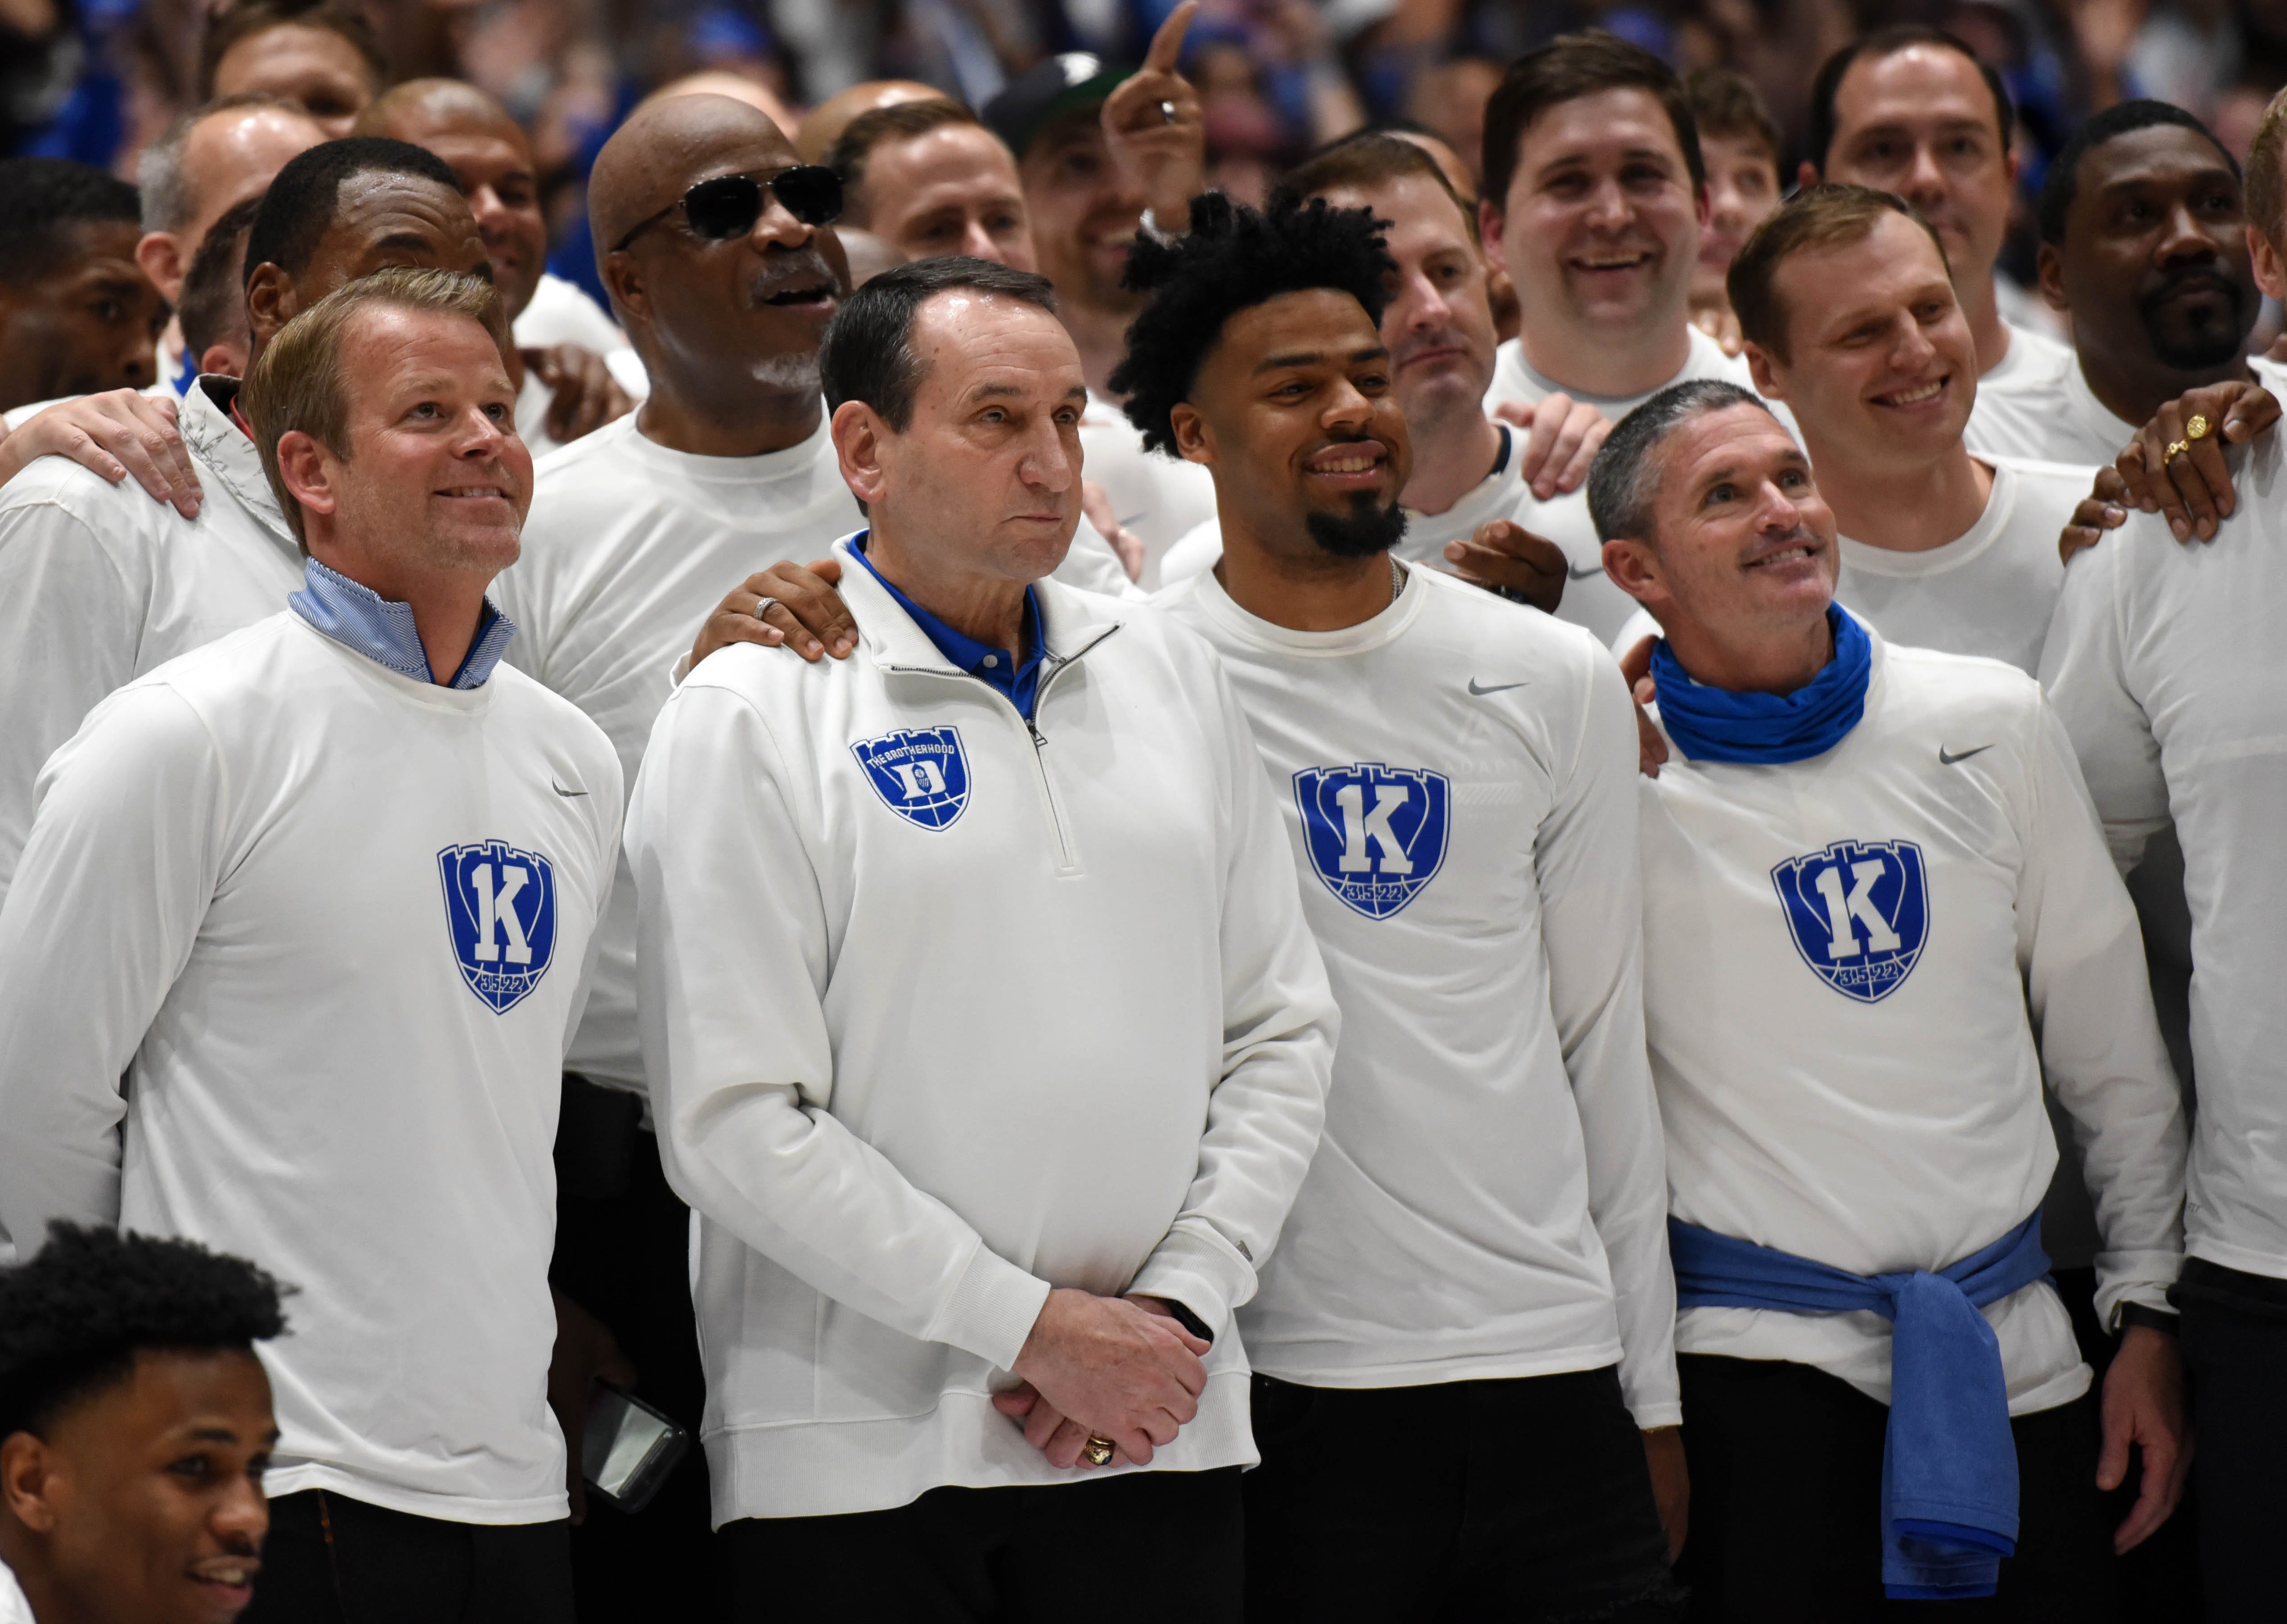 Coach K's over-the-top Duke goodbye signals fading era of star coaches